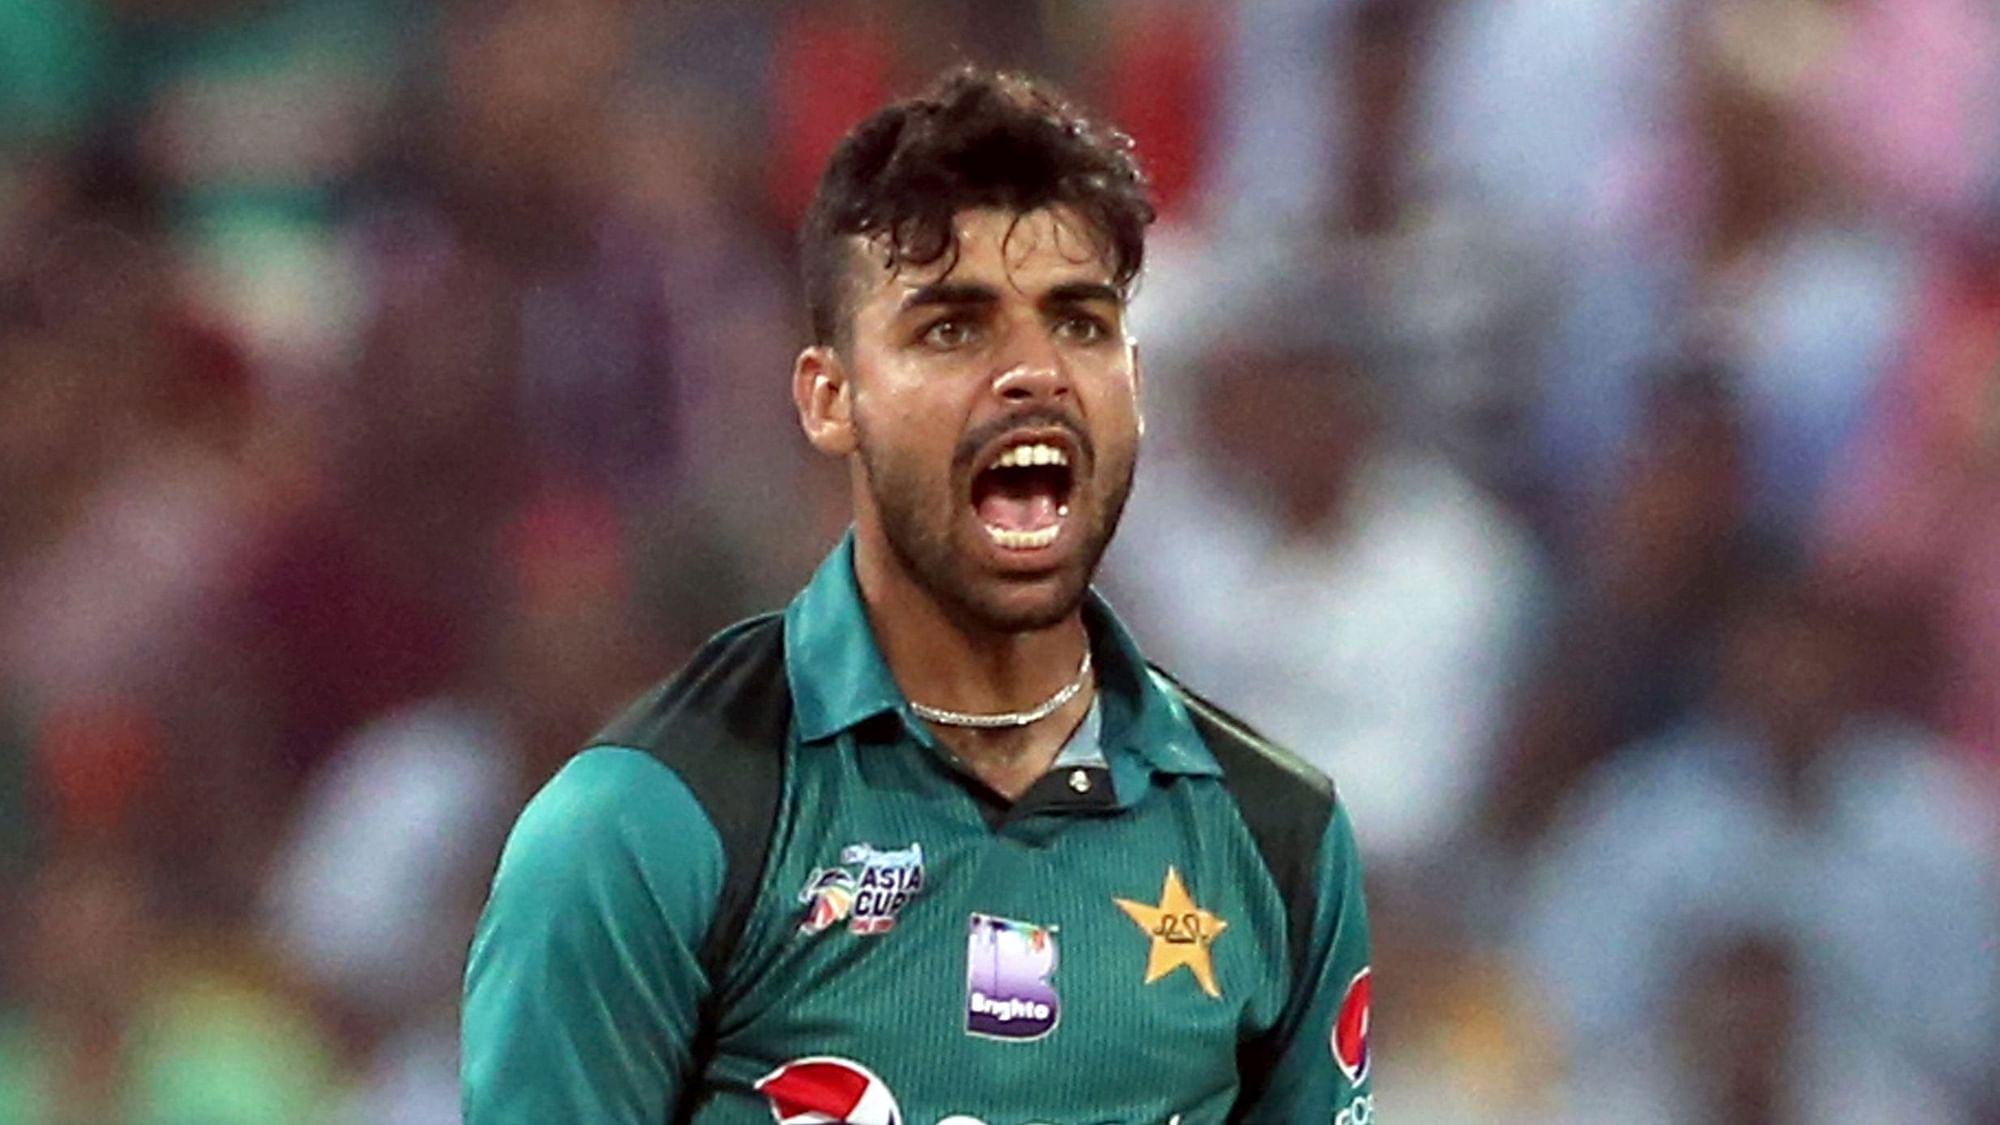 Shadab Khan was ruled out of next month’s one Twenty20 and five-match one-day international series against England due to illness.